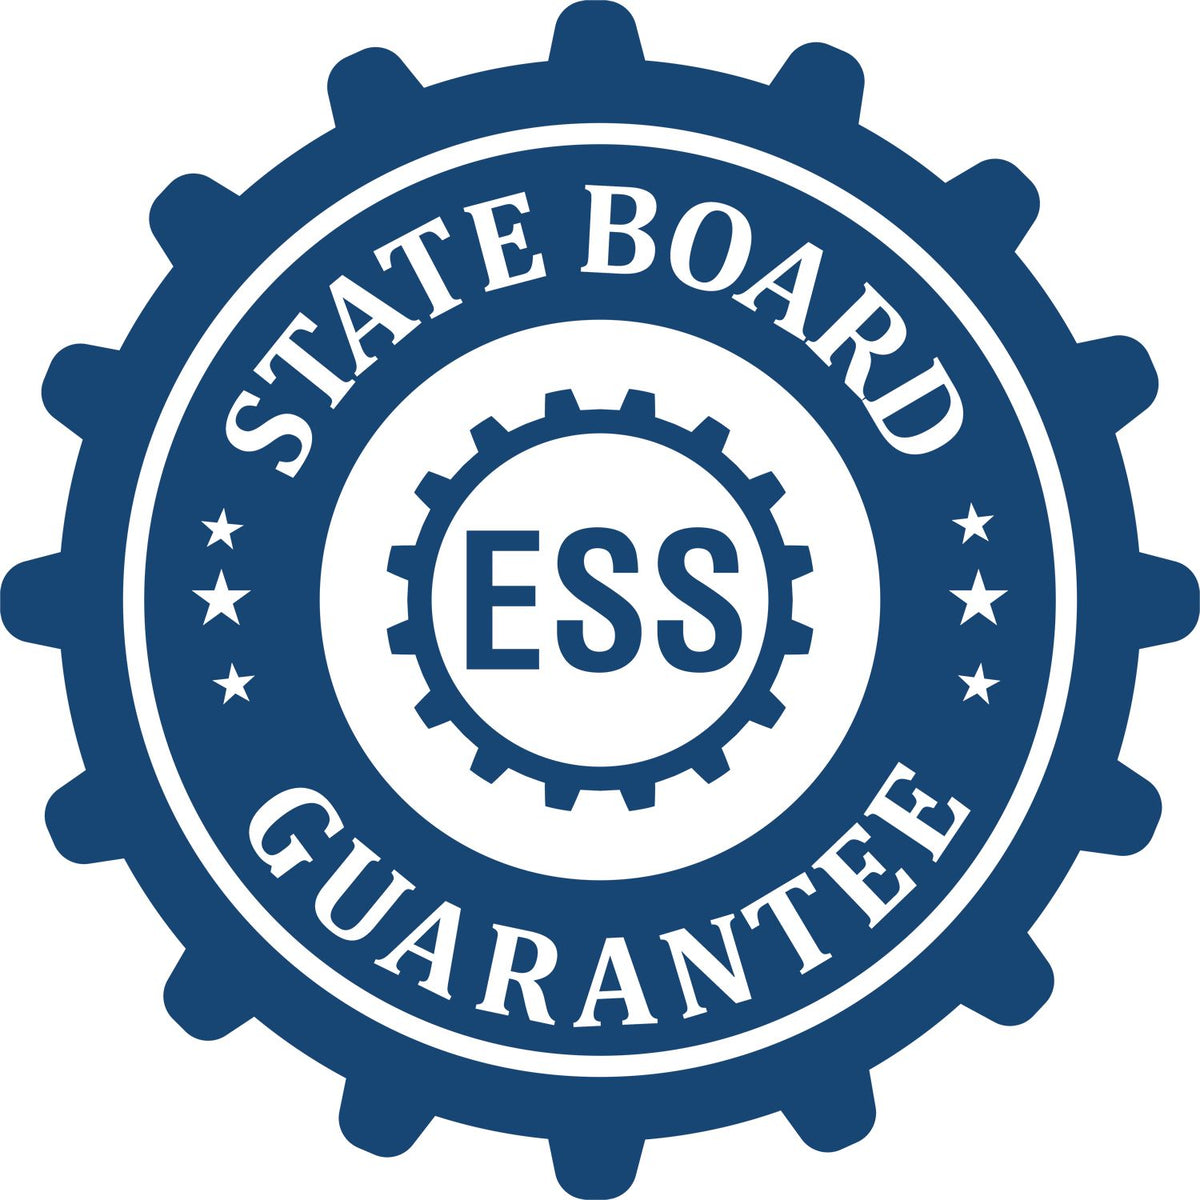 An emblem in a gear shape illustrating a state board guarantee for the Gift Florida Engineer Seal